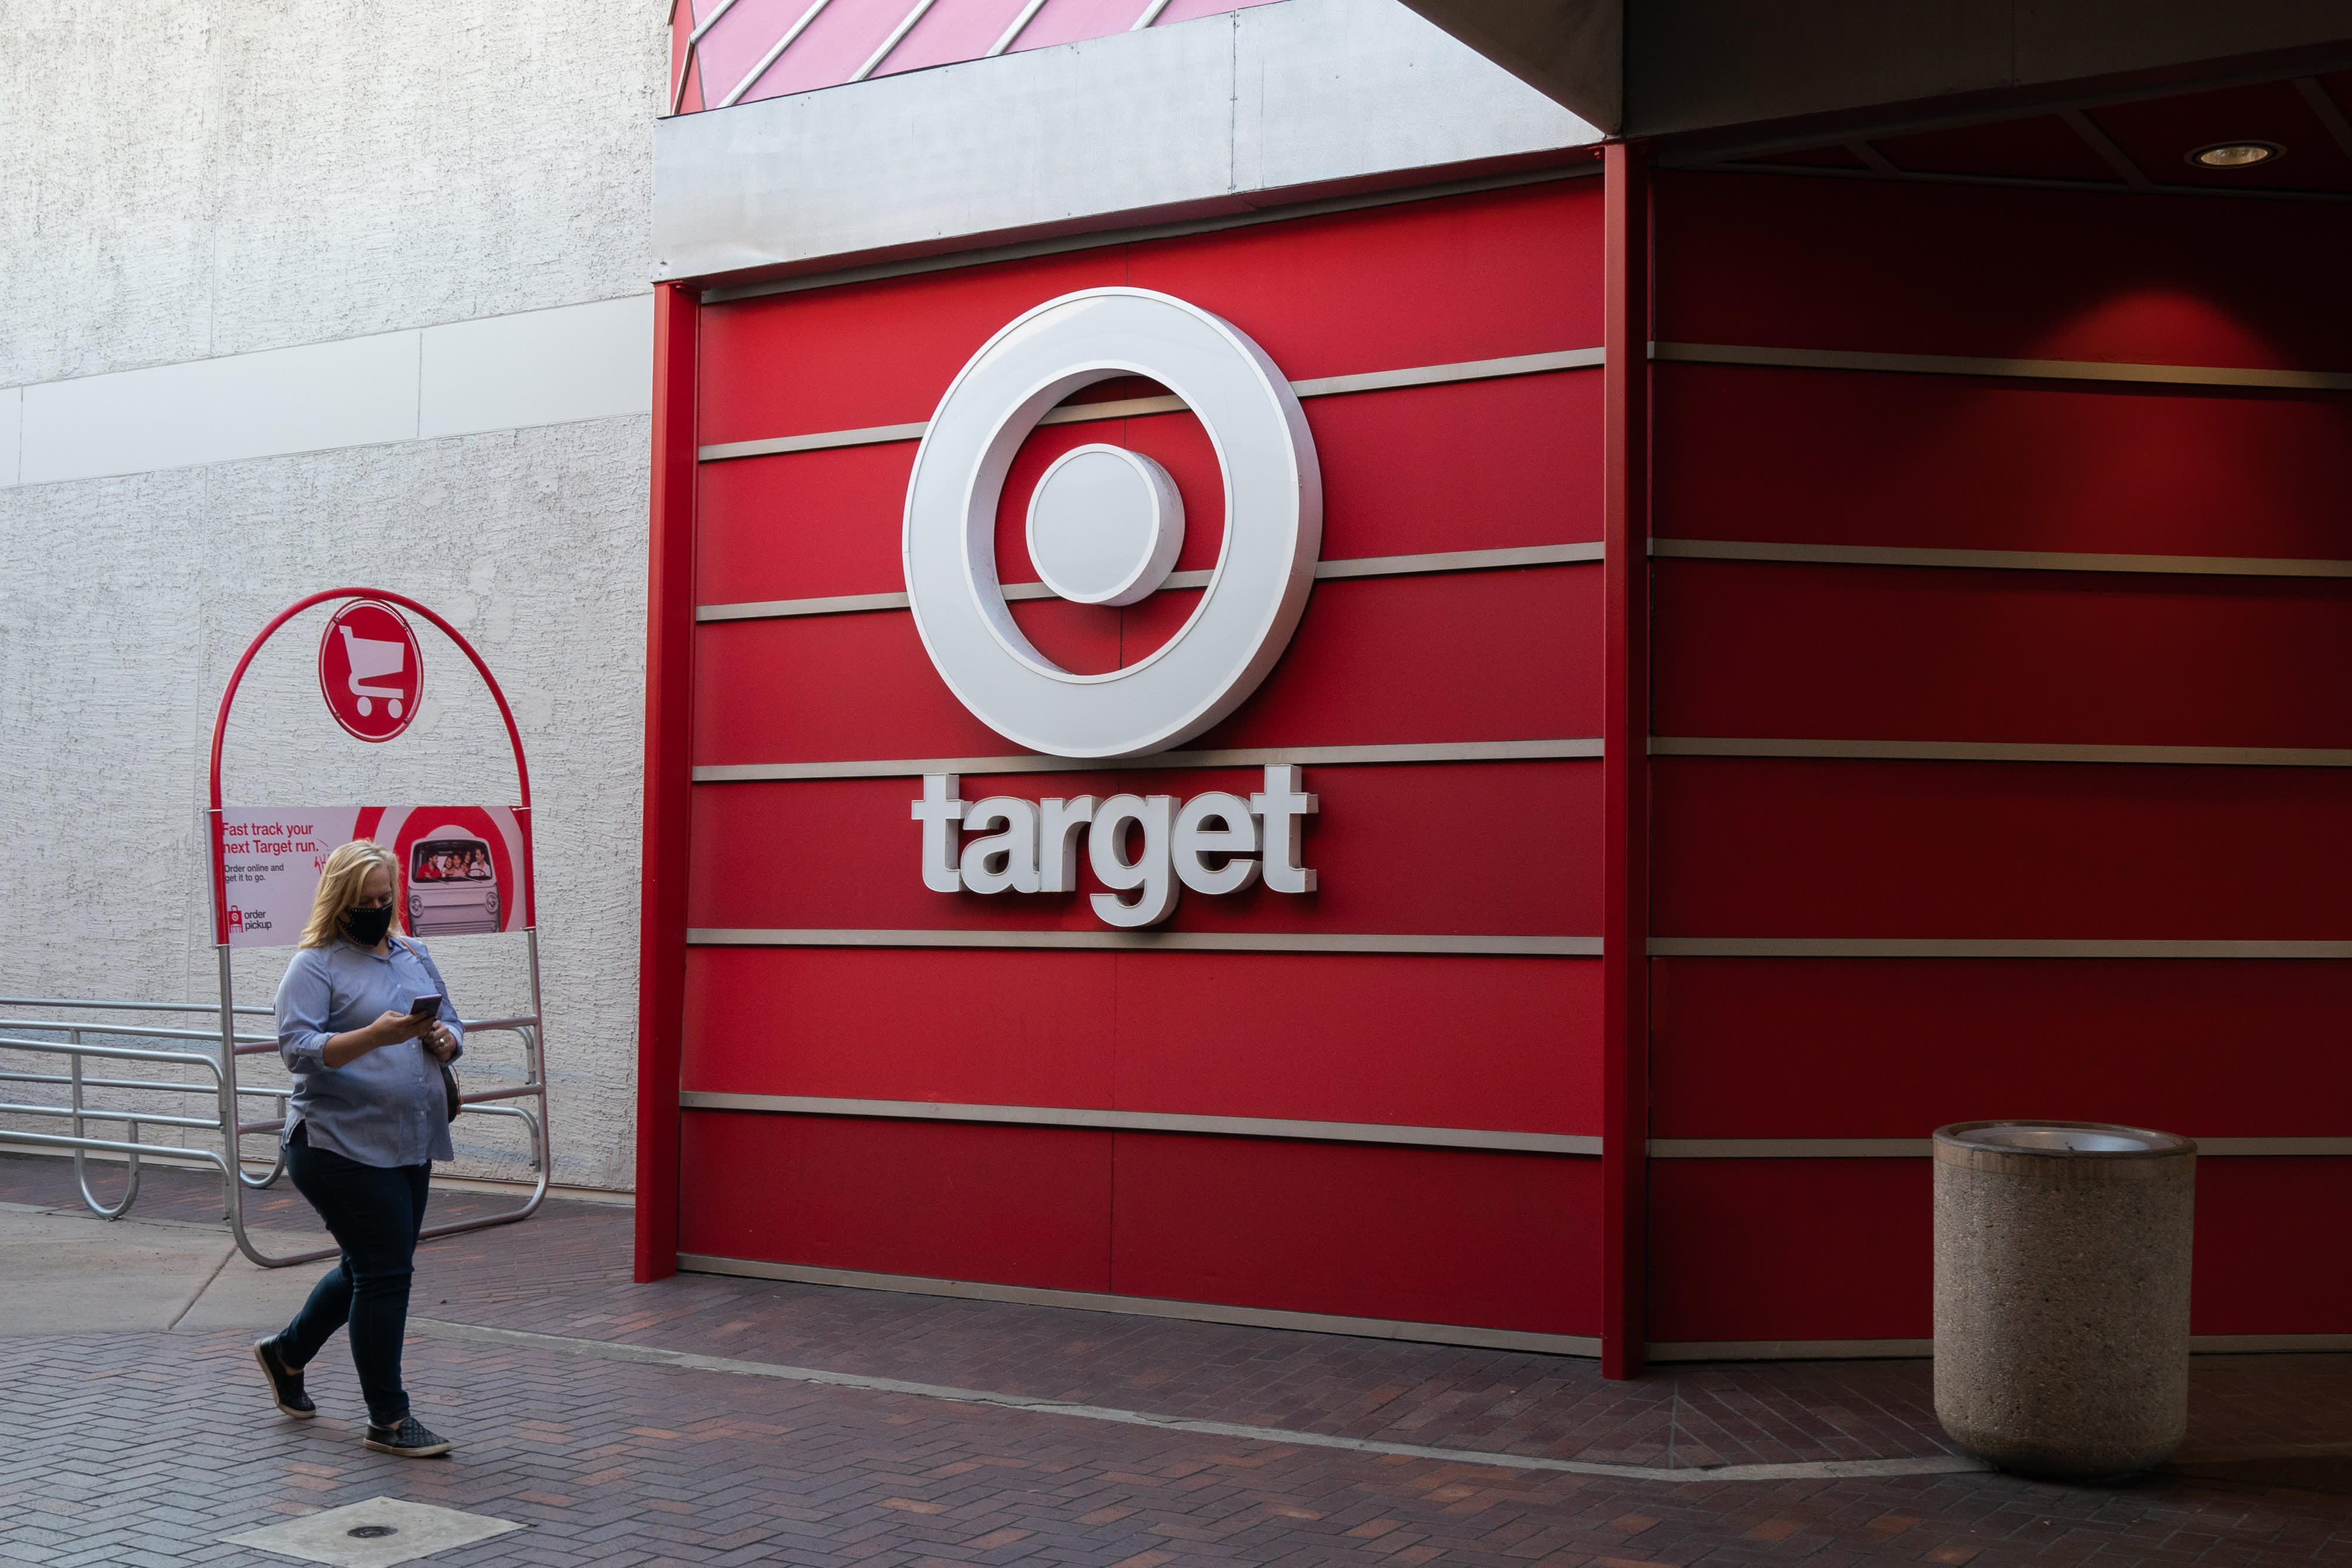 Target to invest $ 4 billion to accelerate new stores, expand supply chain